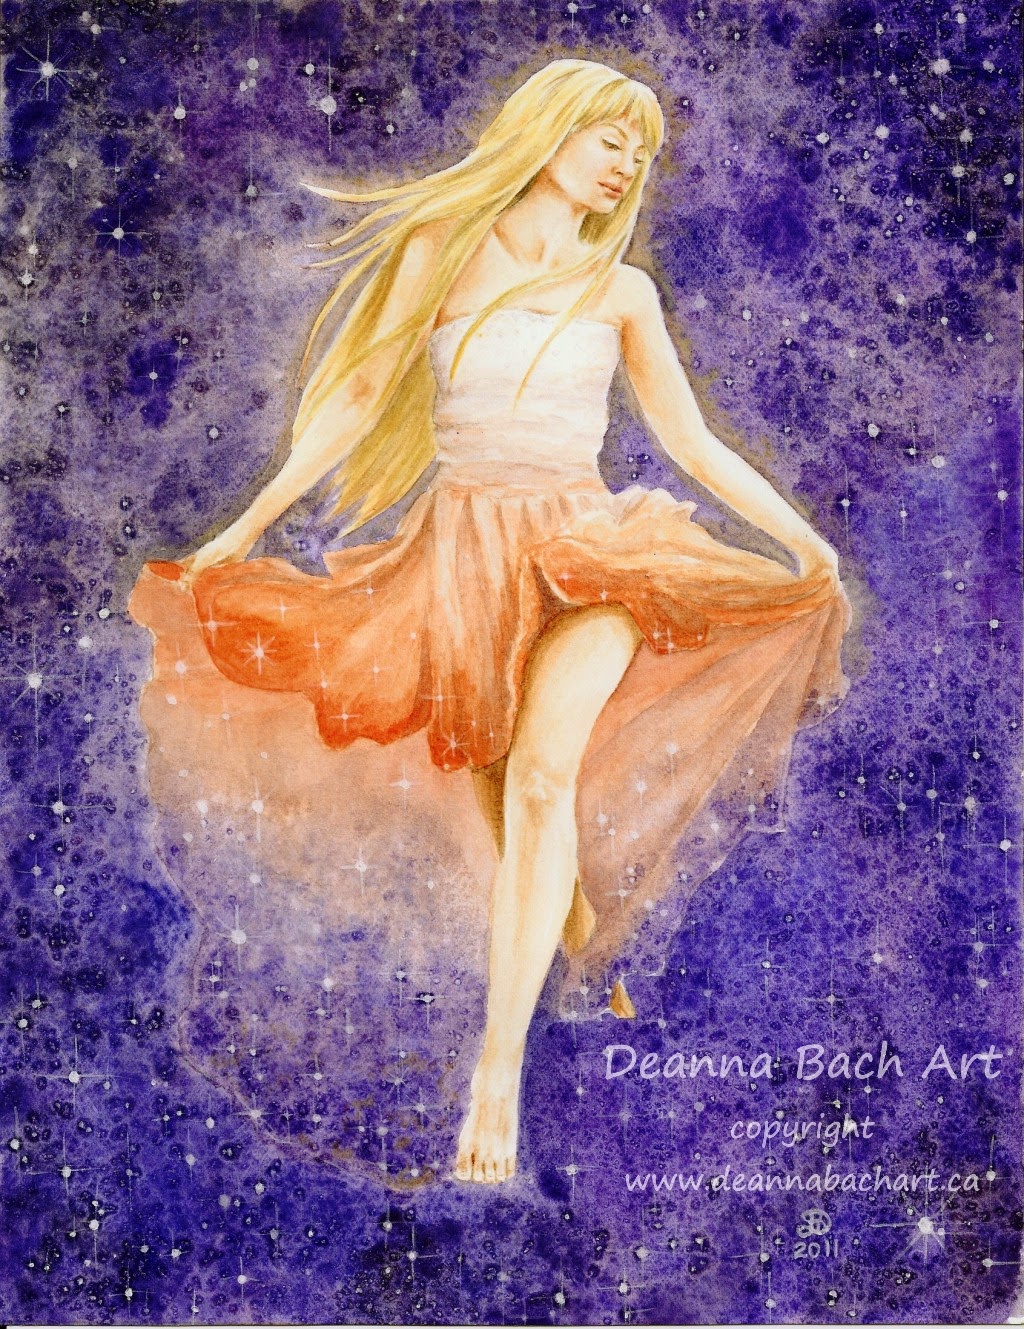 Stardancer by Enchanted Visions Artist, Deanna Bach